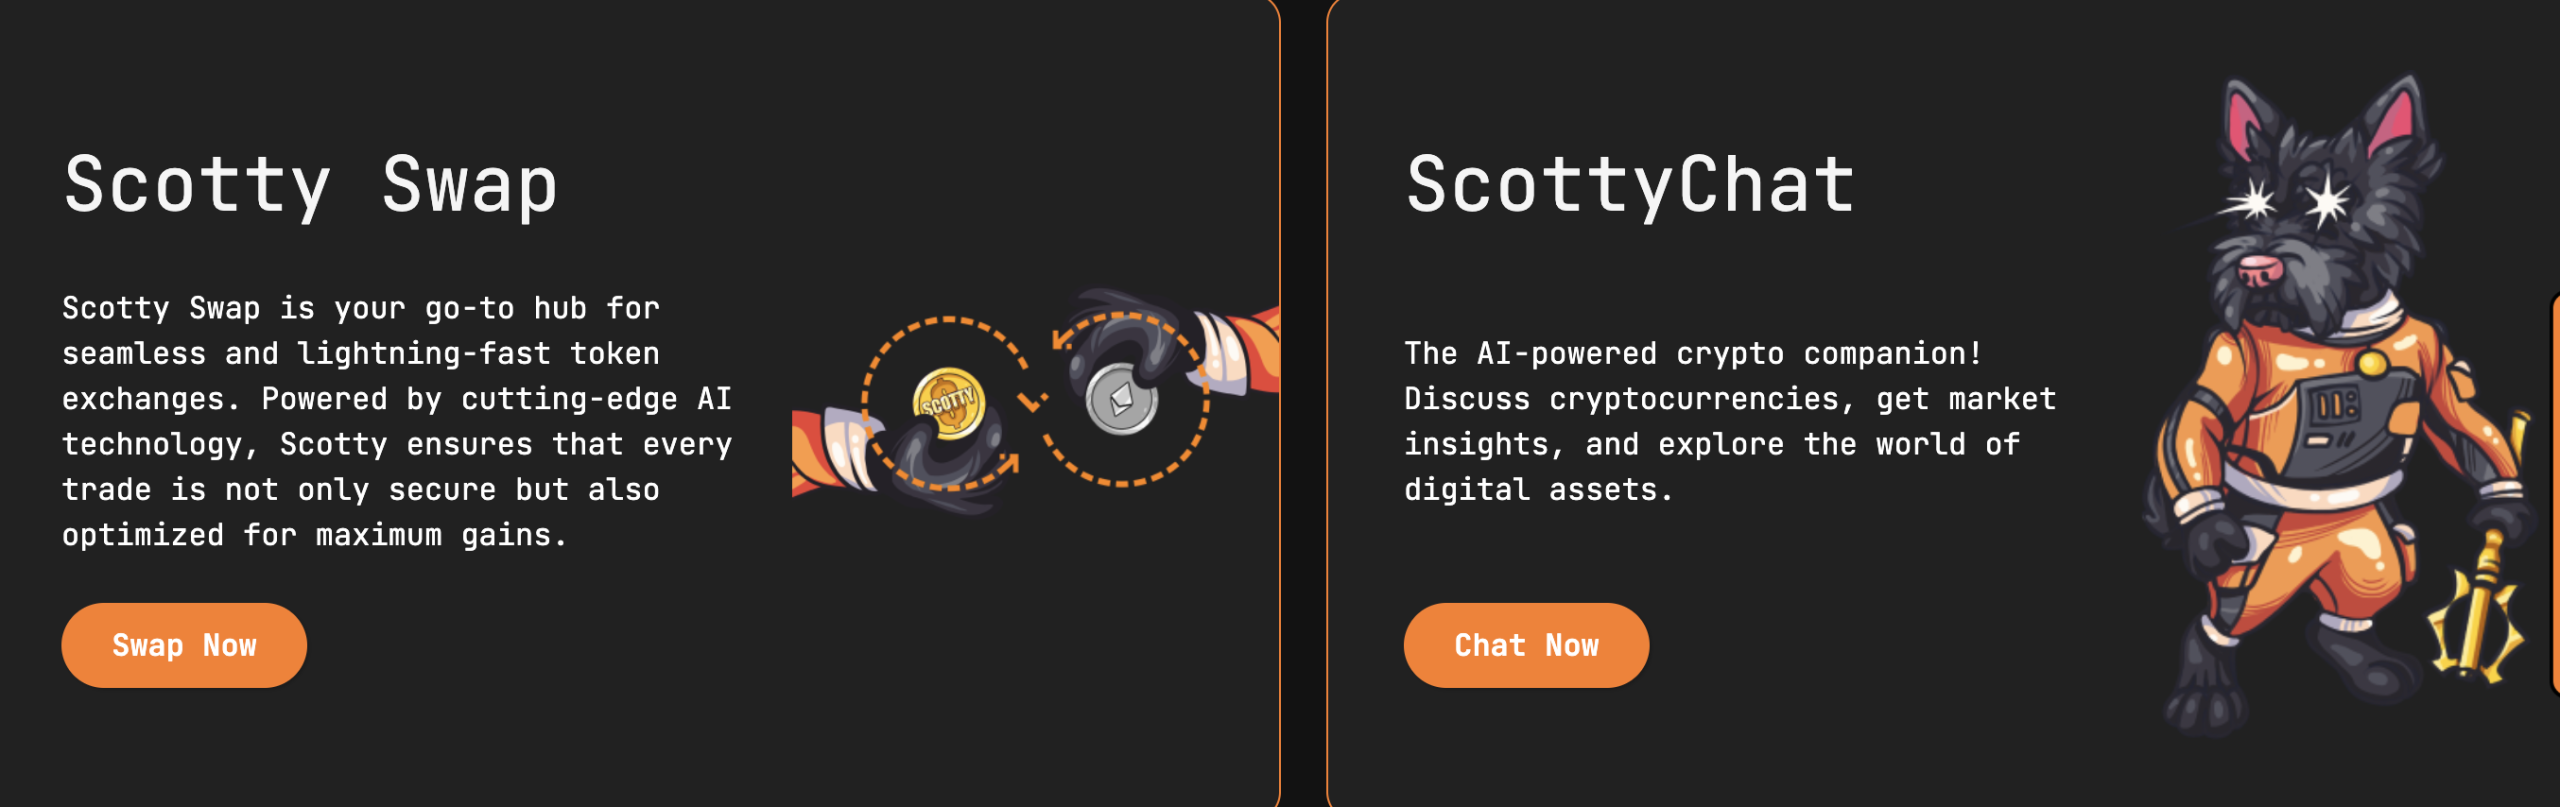 Scotty the AI features